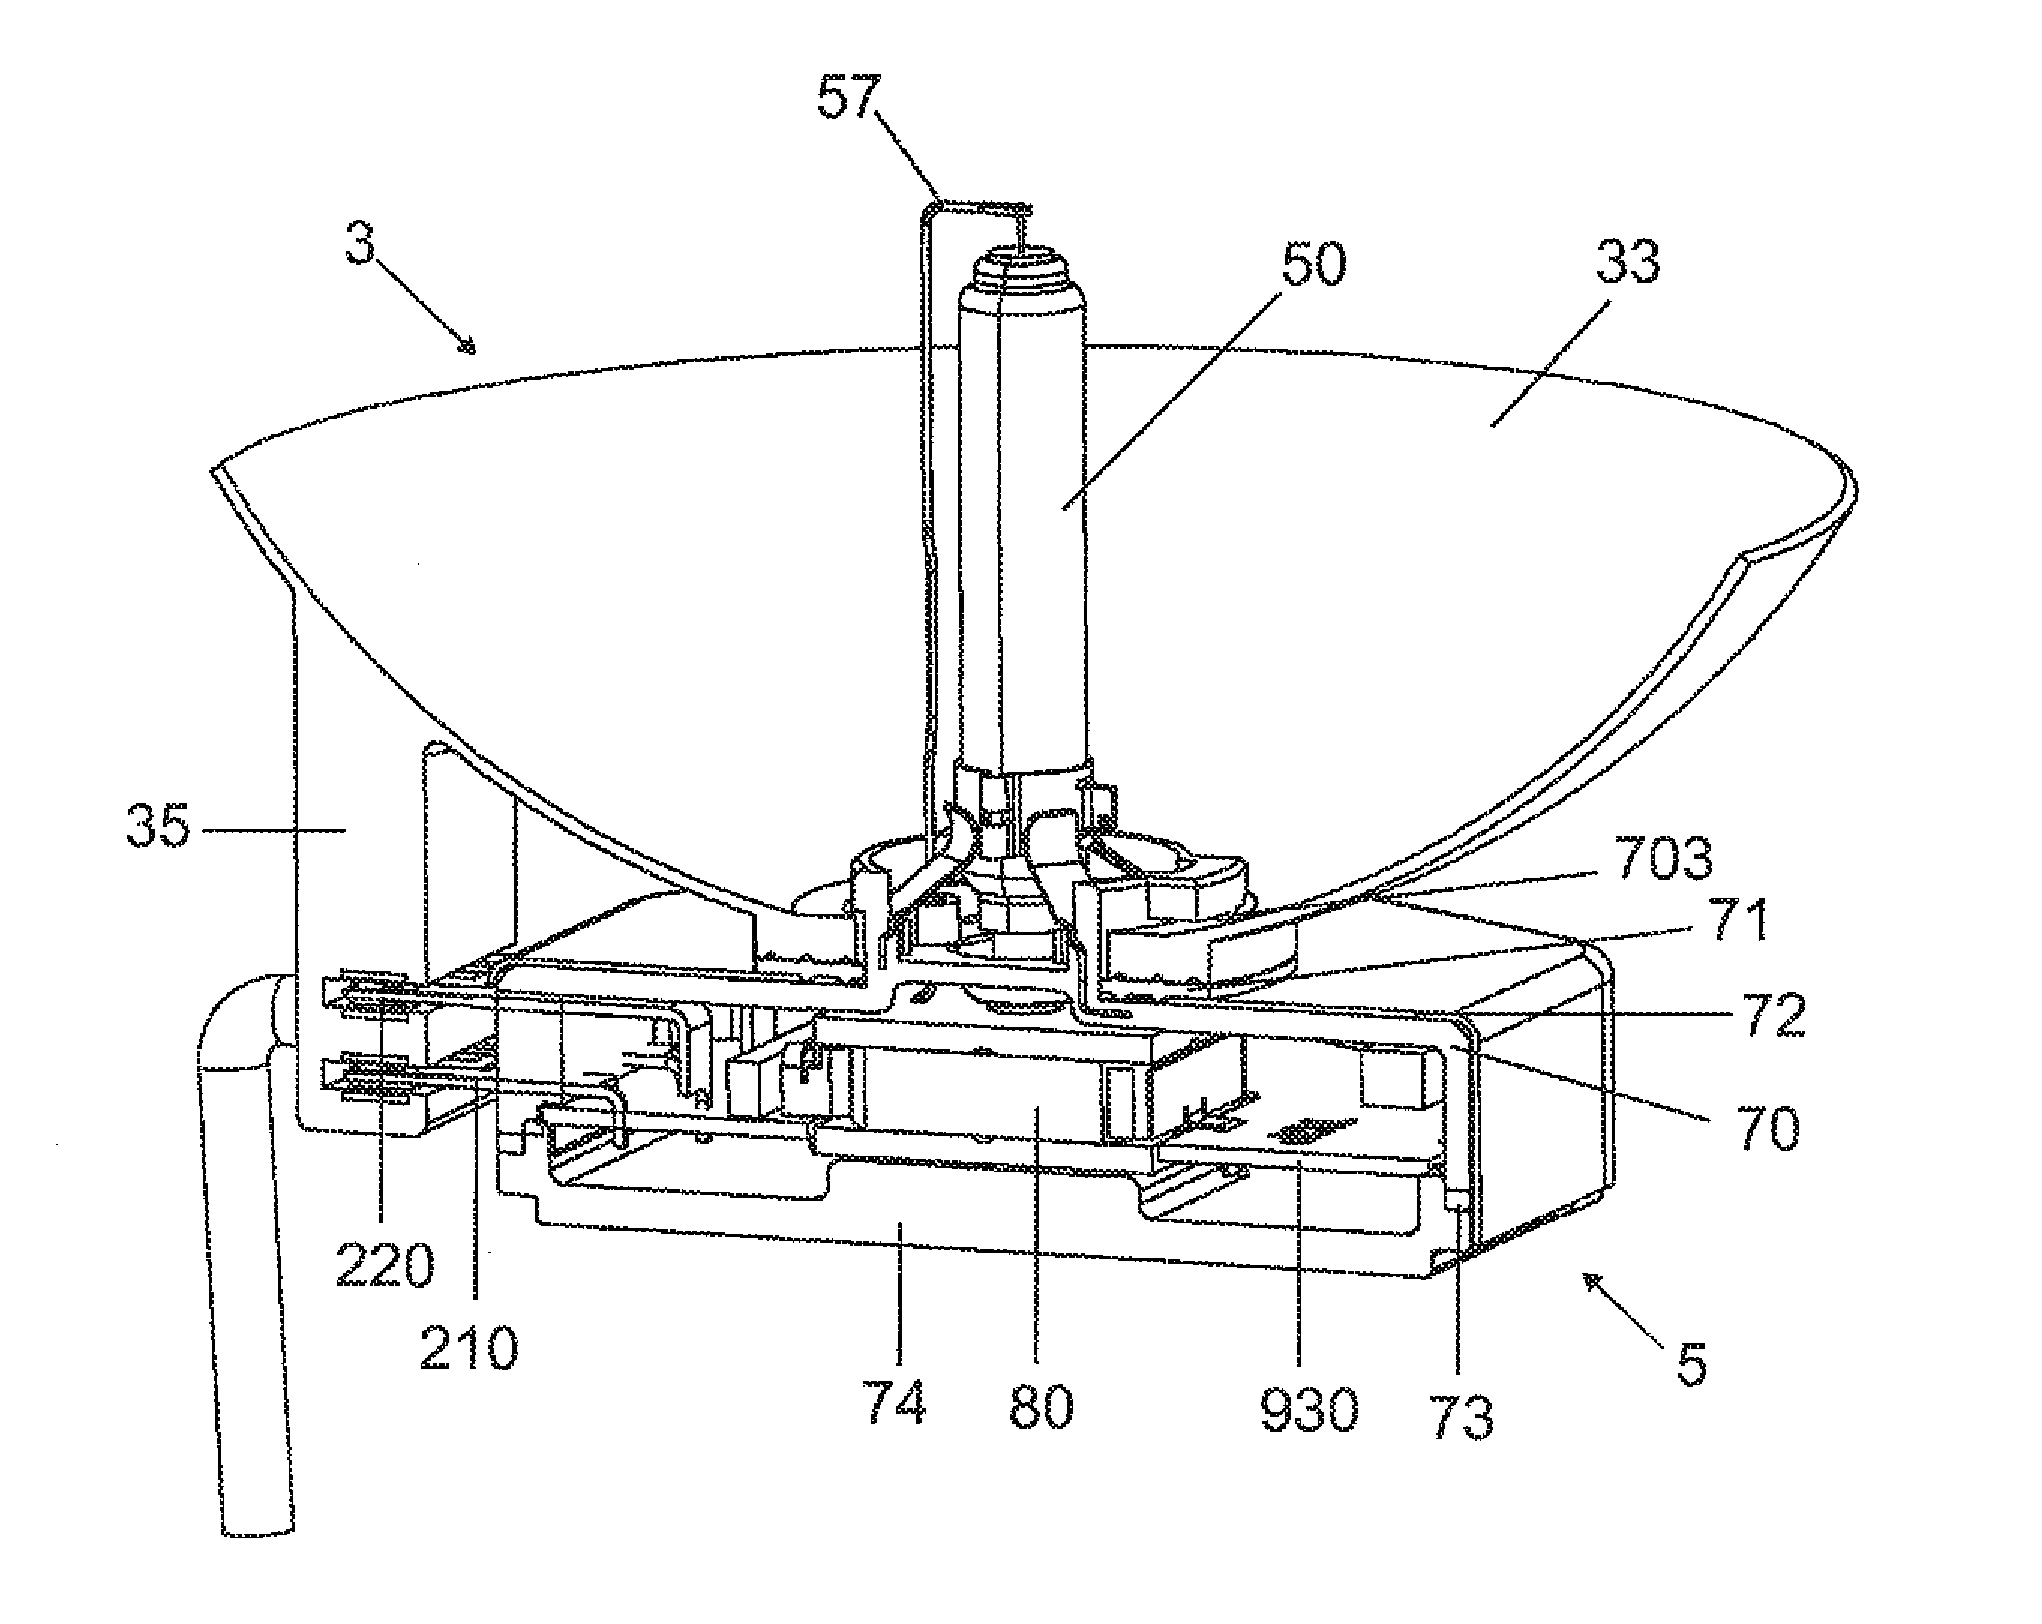 Integrated Gas Discharge Lamp with an Ignition Electronics Integrated Into the Base for Generating Asymmetrical Ignition Pulses